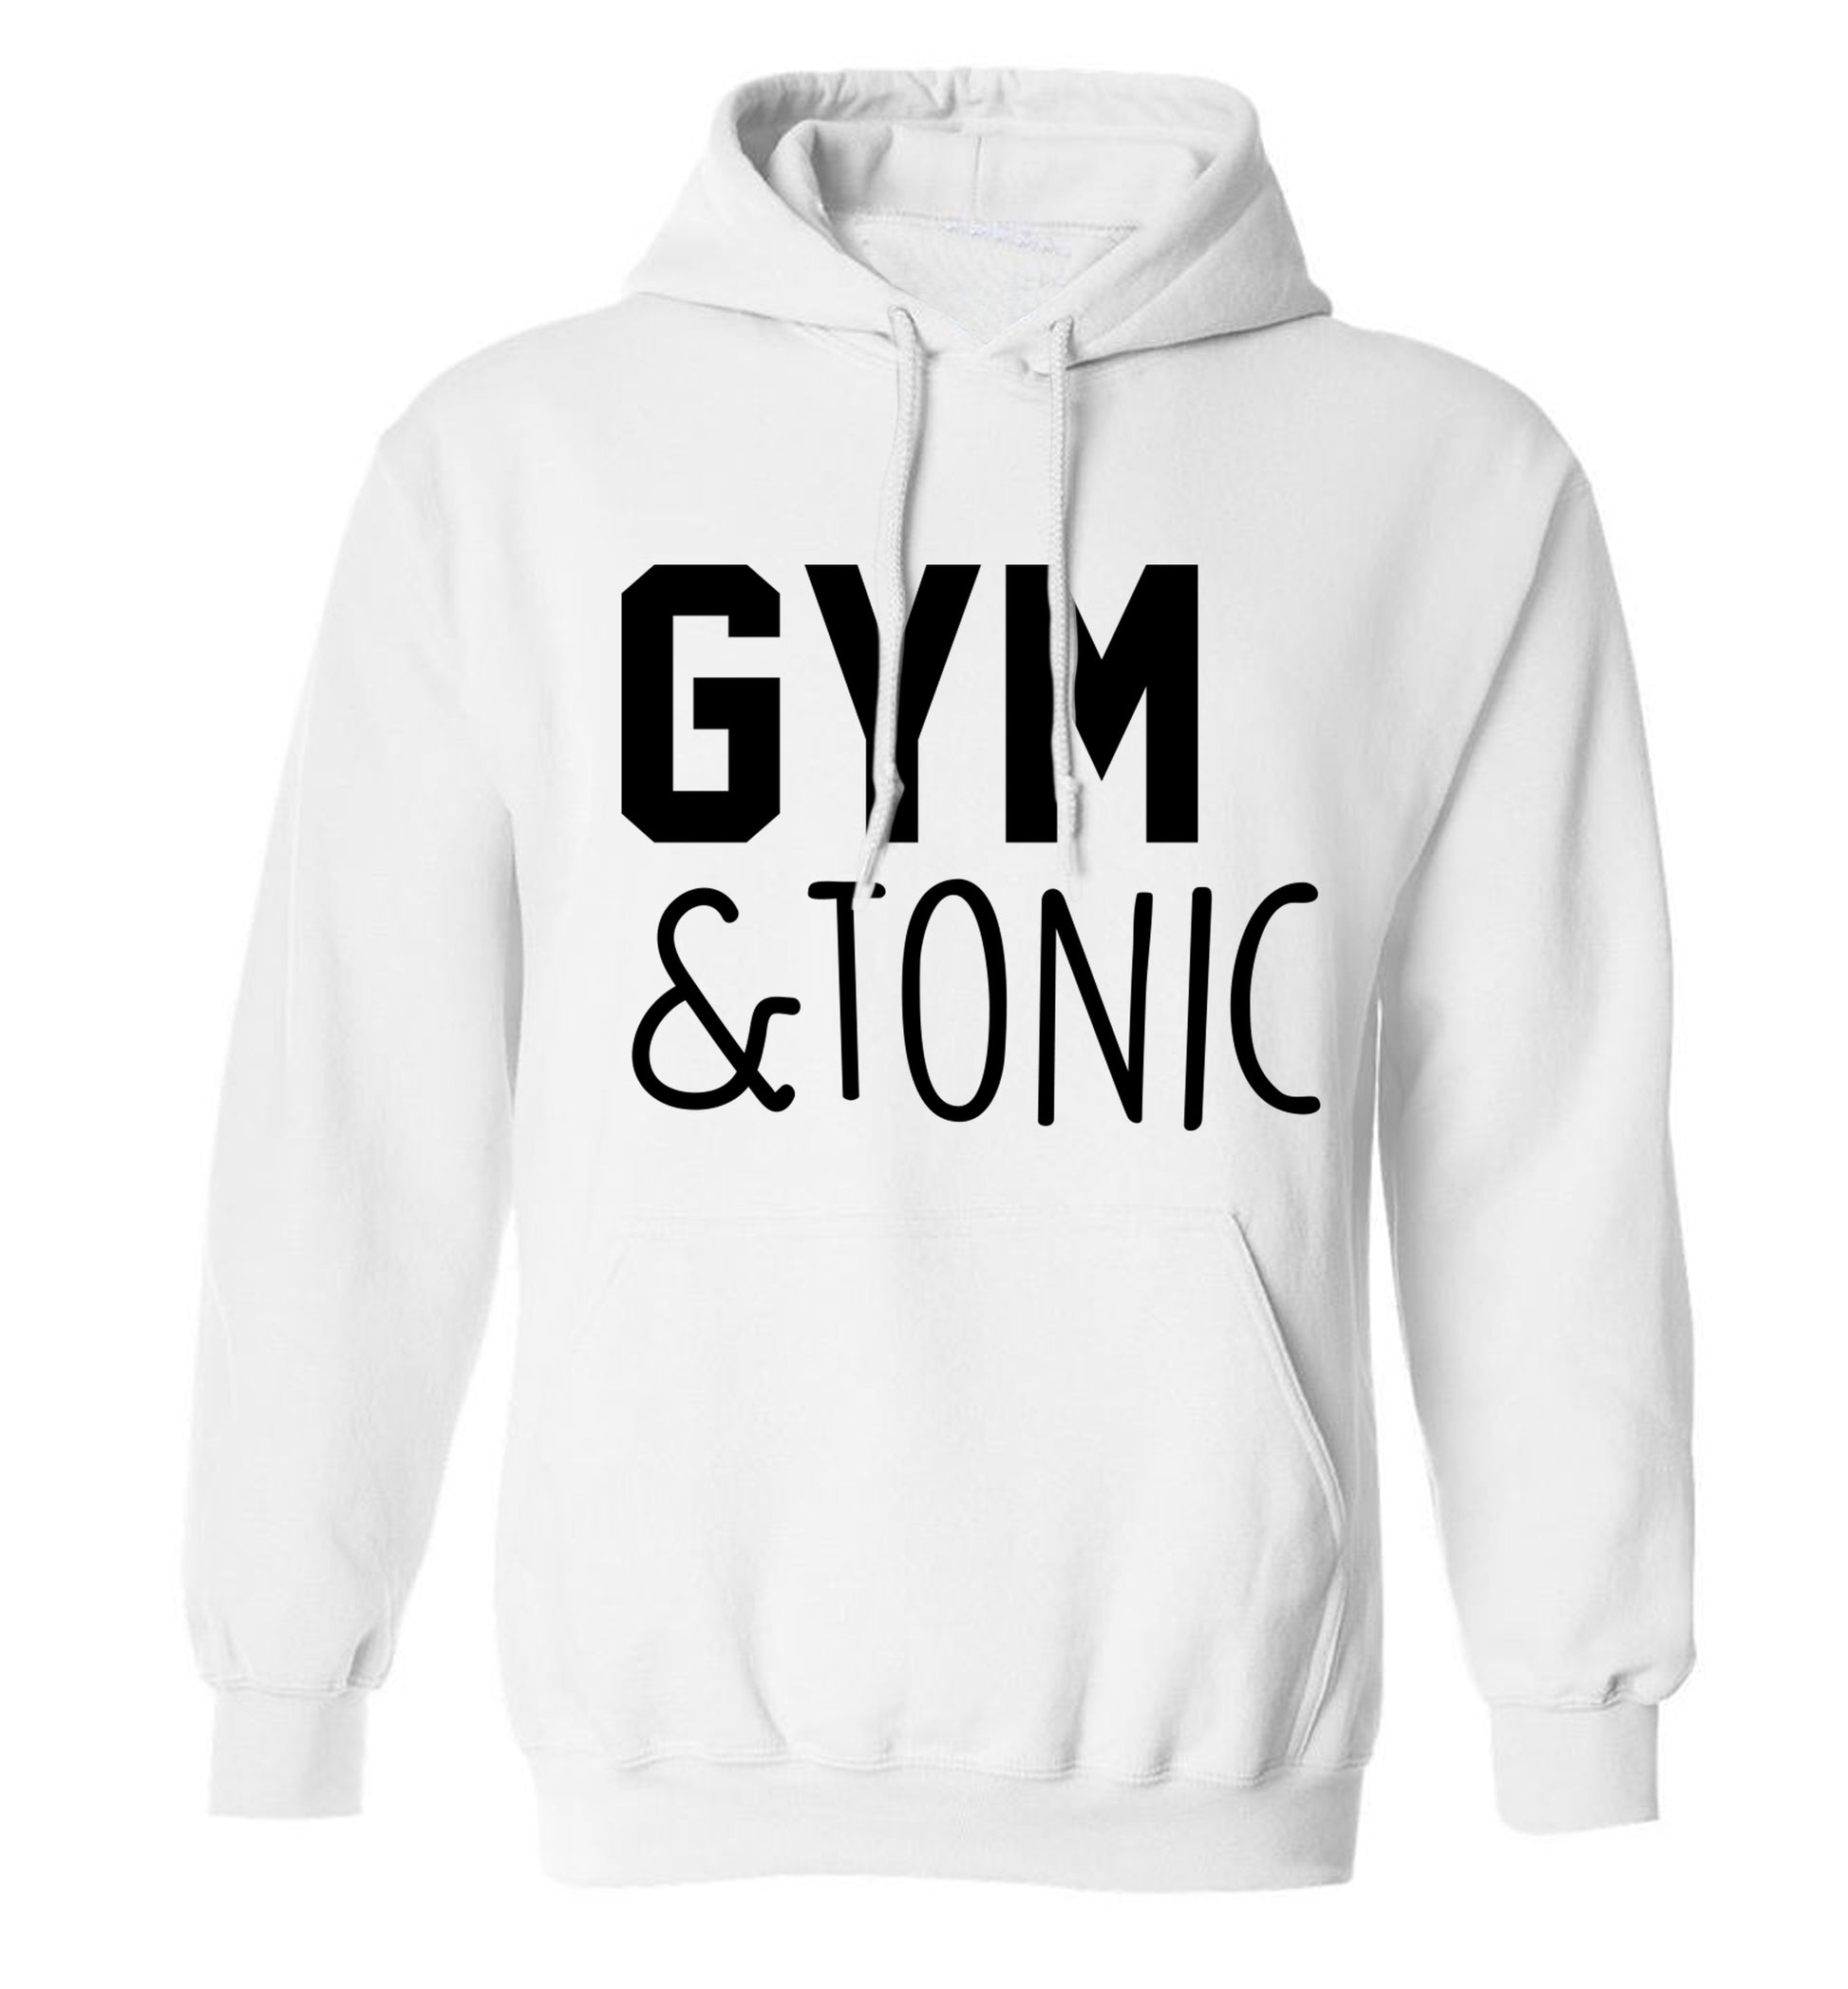 Gym and tonic adults unisex white hoodie 2XL